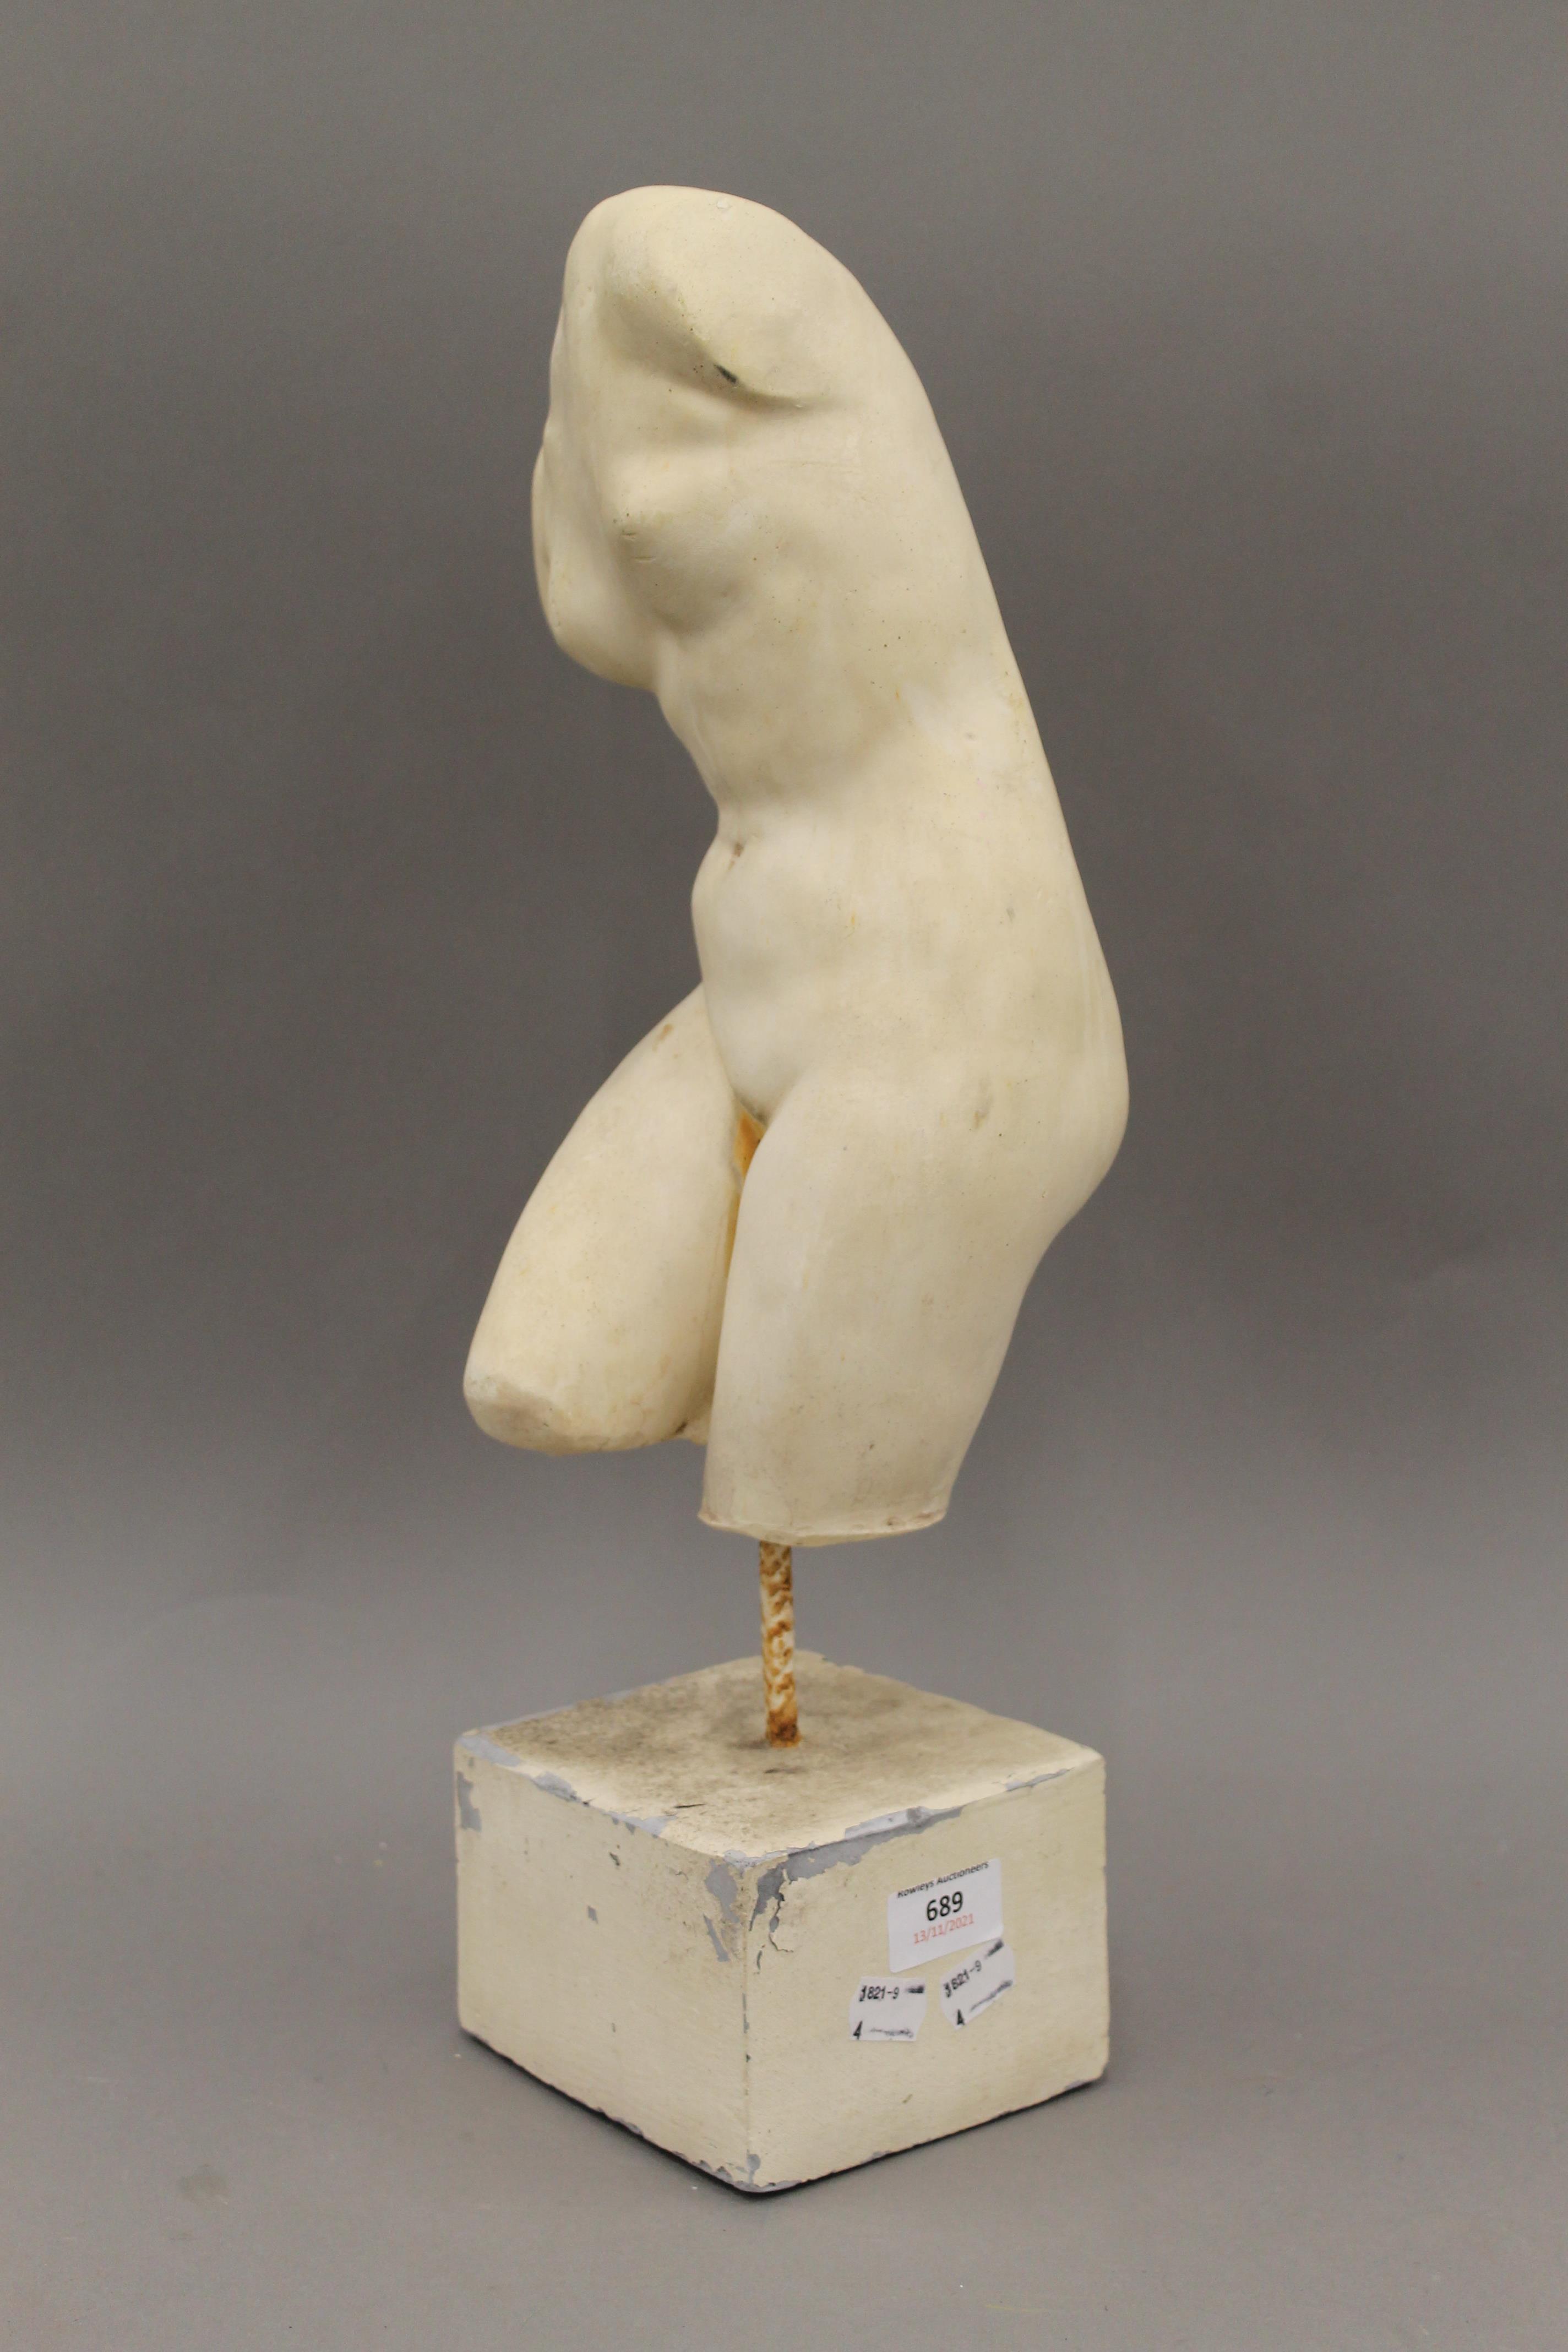 A plaster model of a female torso mounted on a display plinth. 49 cm high. - Image 2 of 3